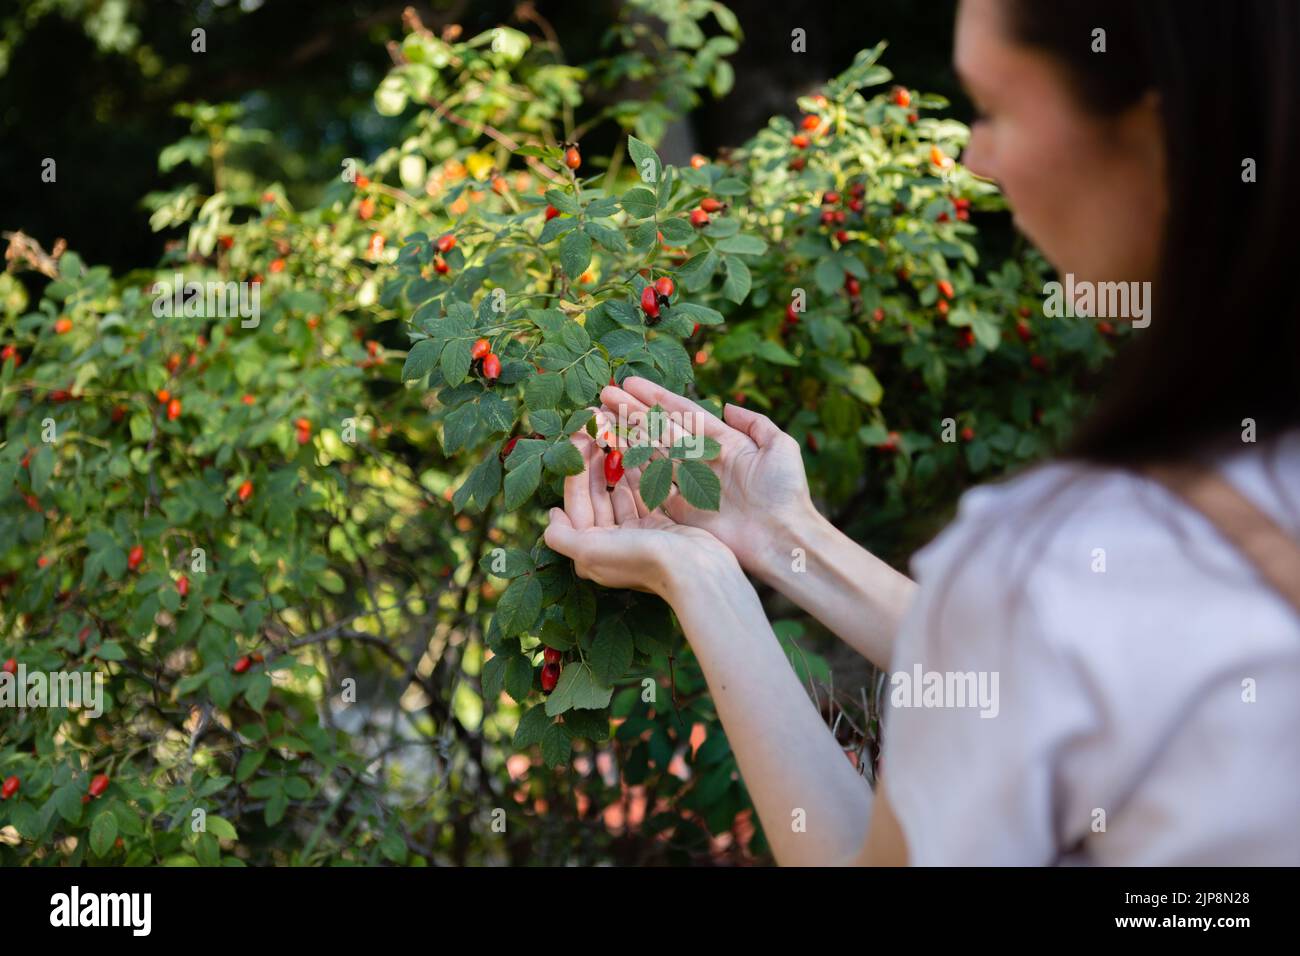 A woman collects rosehip berries from a green bush. Stock Photo